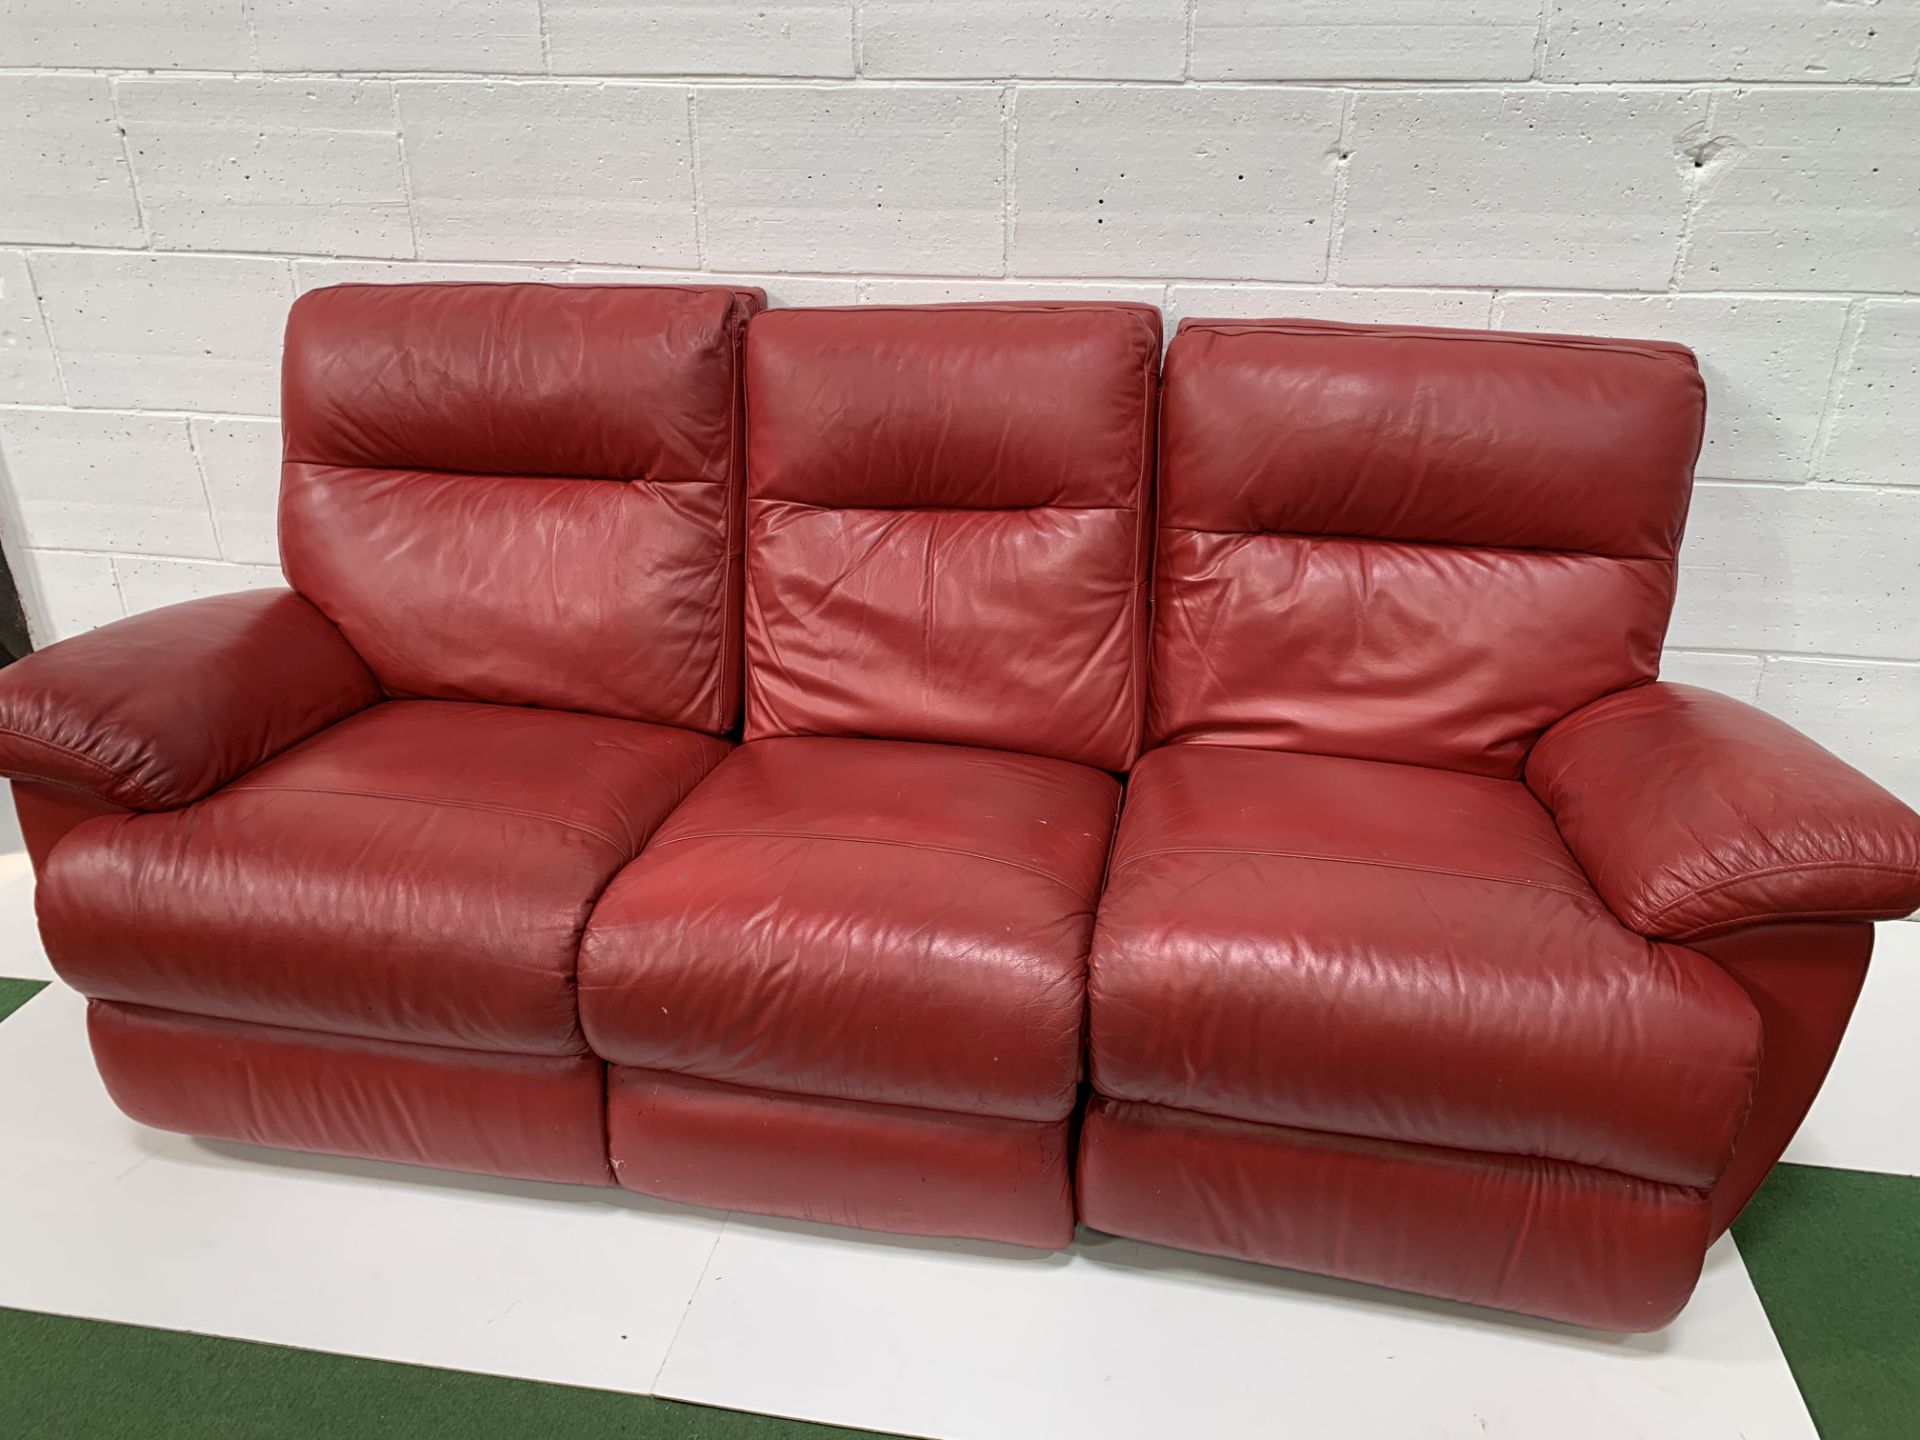 Red leather three seat sofa with reclining ends, and a matching pouffe.